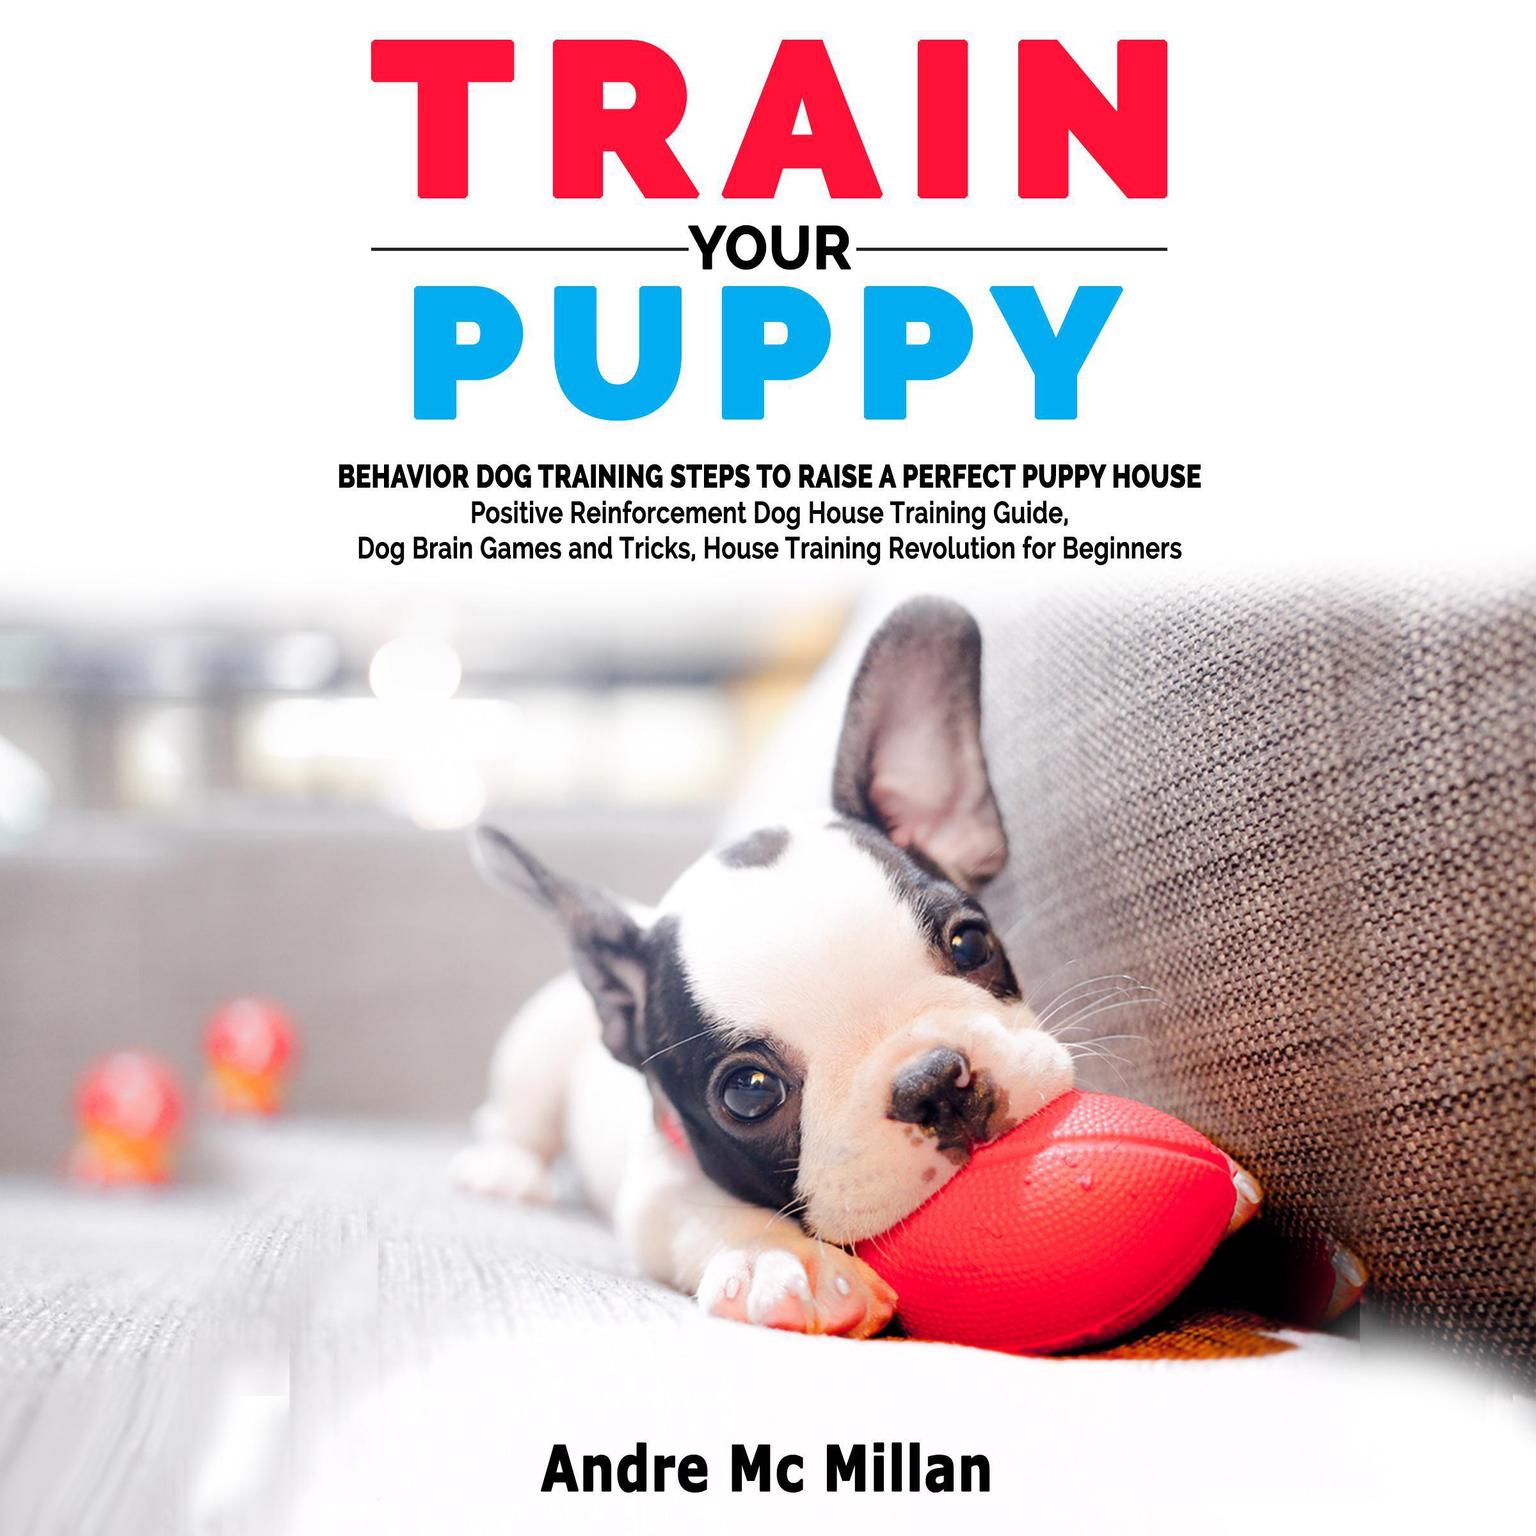 Train your puppy: Behavior Dog Training Steps to Raise a Perfect Puppy House – Positive Reinforcement Dog House Training Guide, Dog Brain Games and Tricks, House Training Revolution for Beginners Audiobook, by Andre McMillan